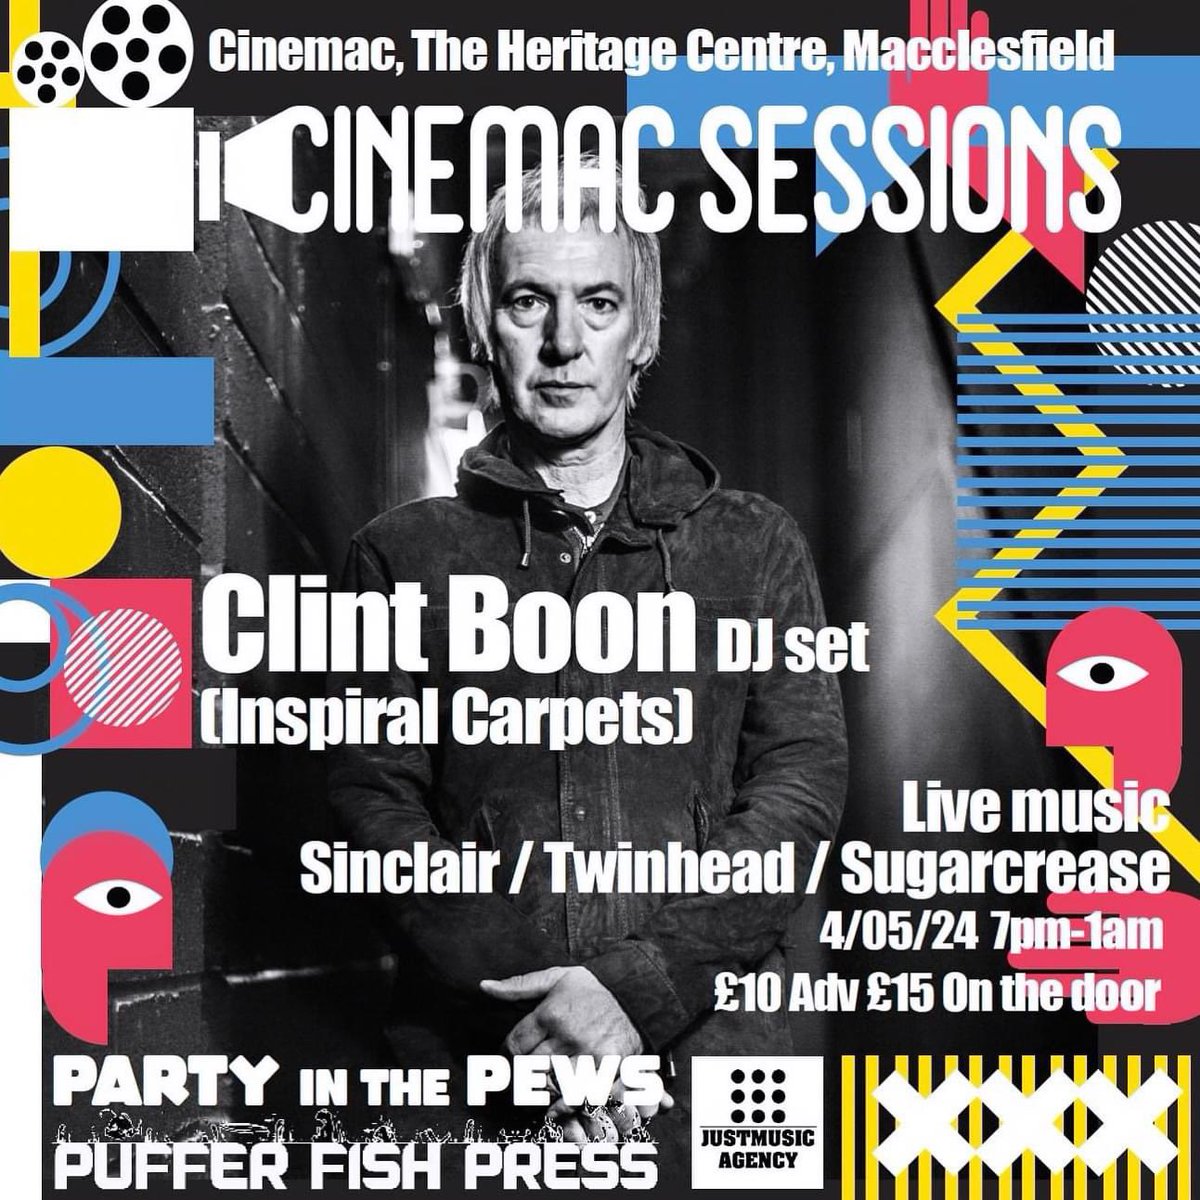 I’m back at Cinemac in Macclesfield on Saturday 4th May. Tickets on sale now. See you there party people! xxx